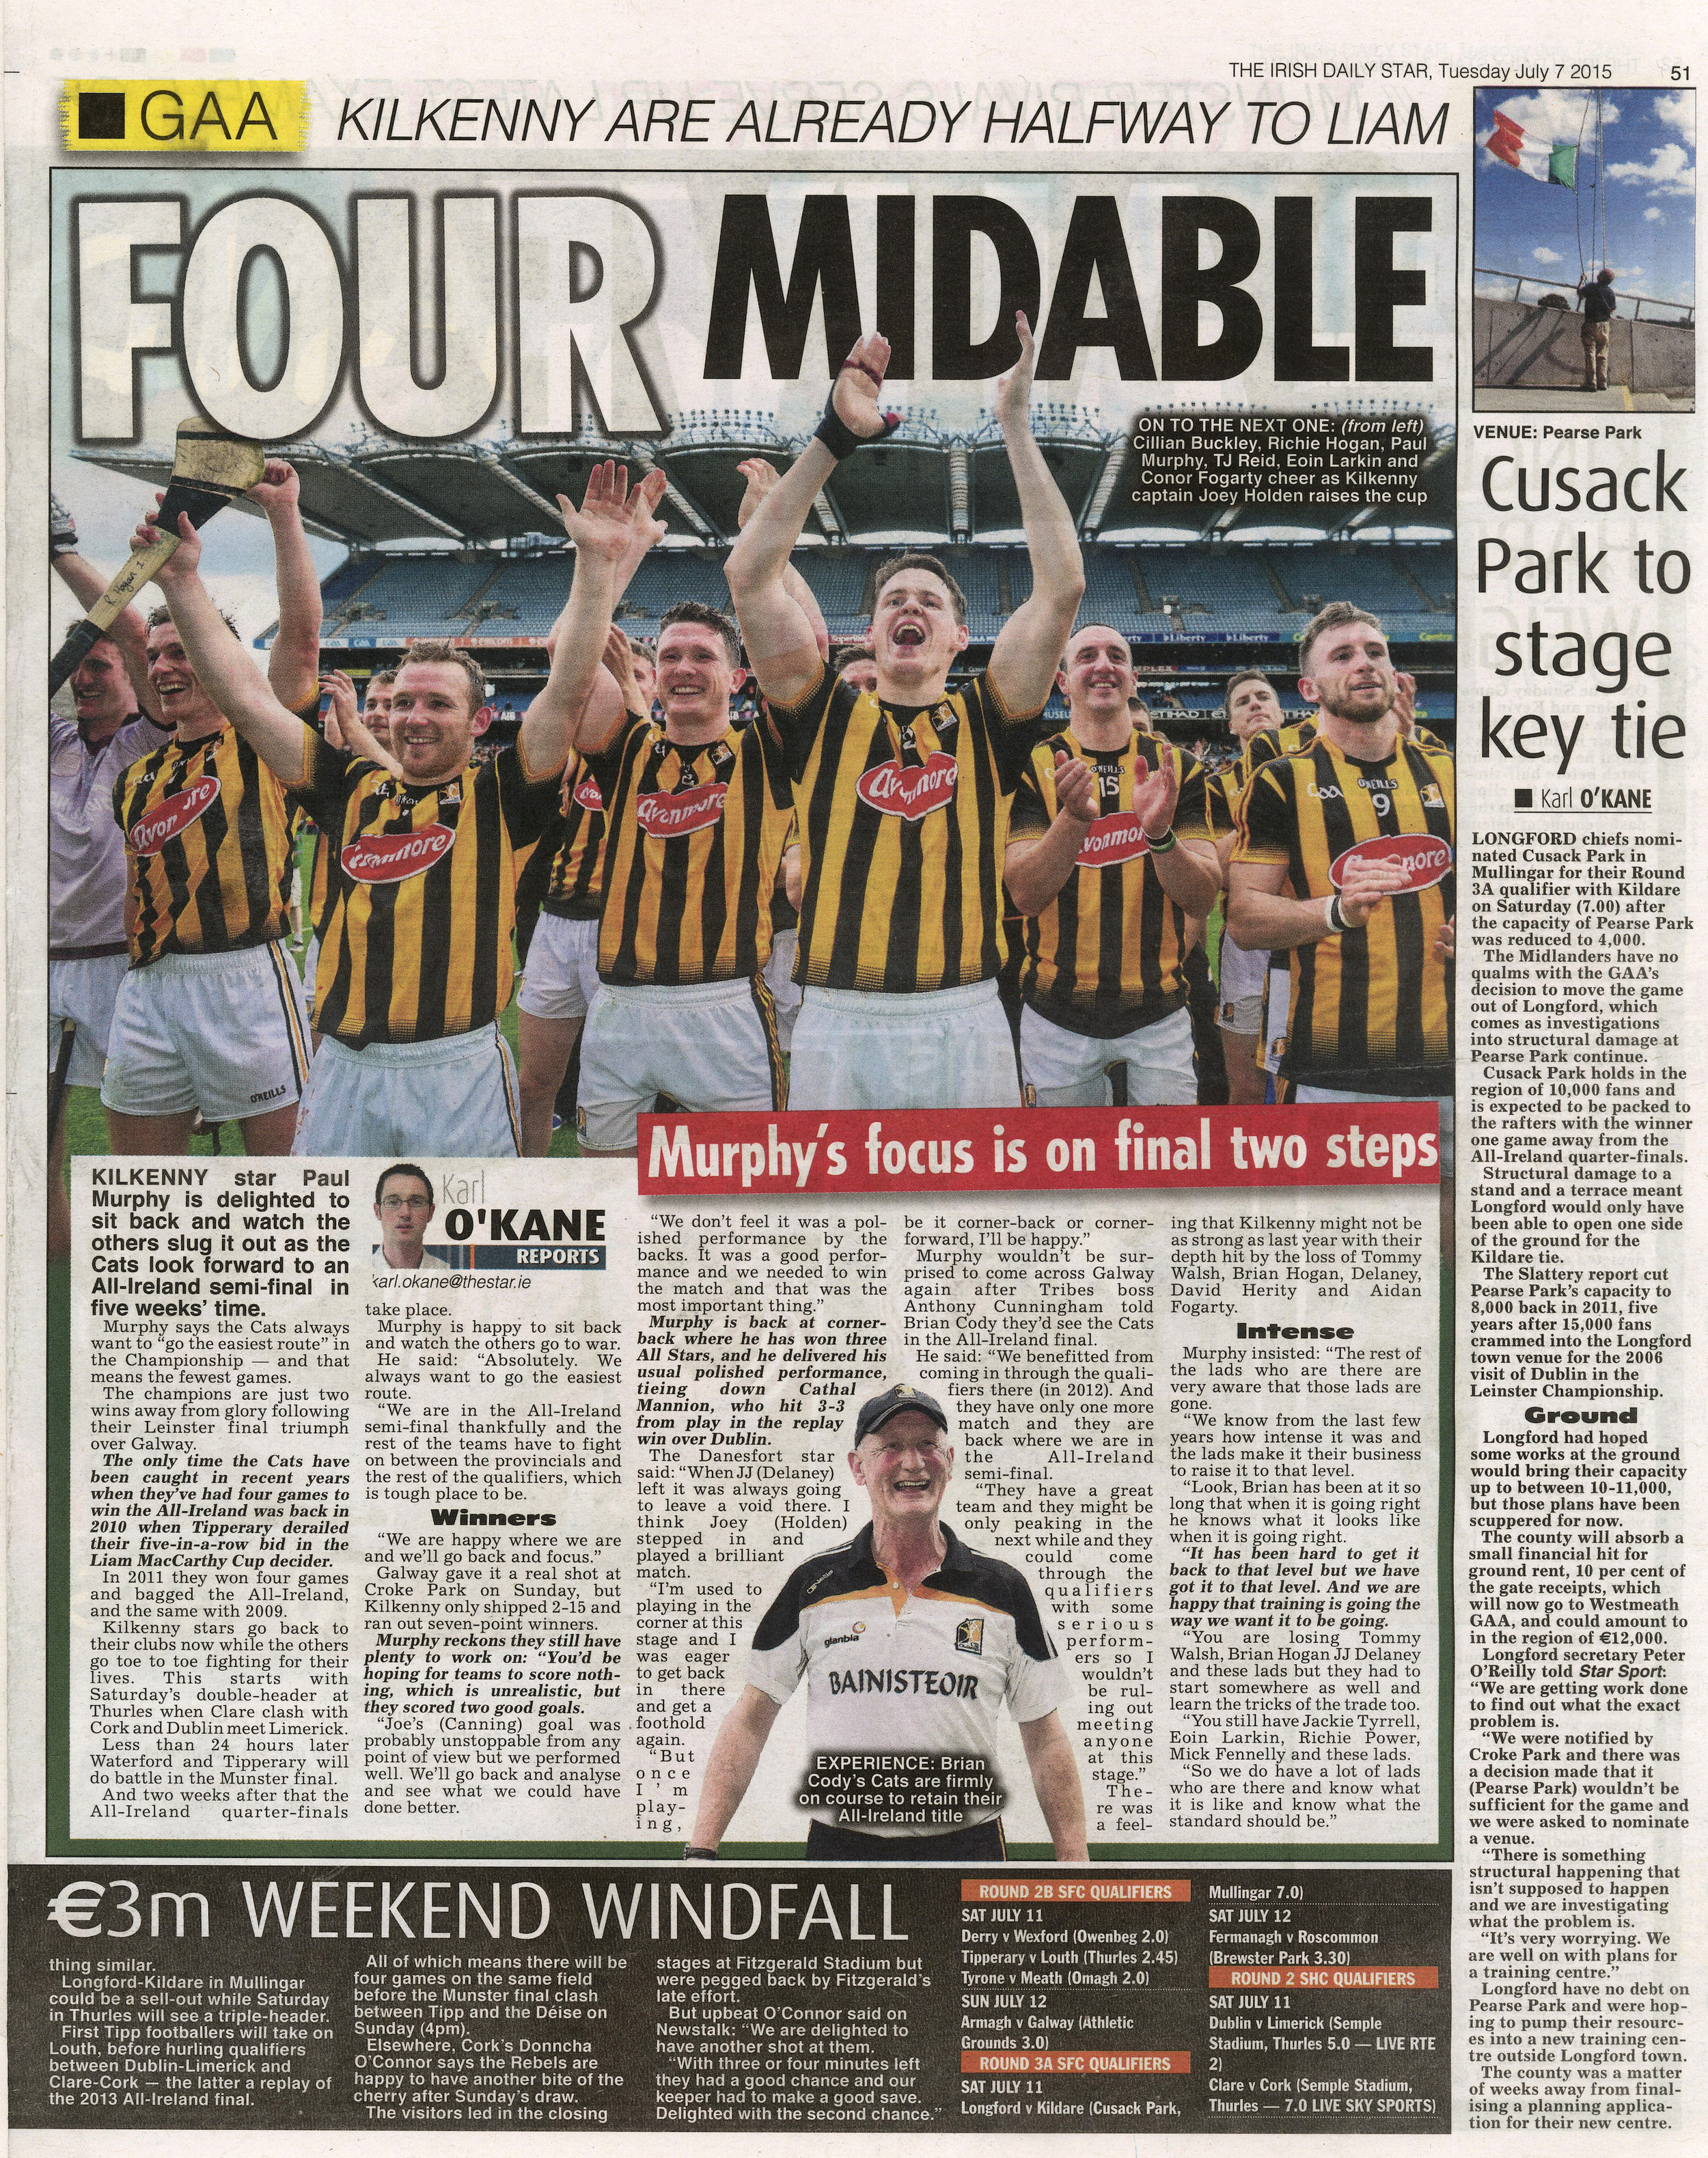  Kilkenny celebrates victory over Galway to win Leinster Senior Hurling Championship at Croke Park July 7 2015  Irish Daily Sun  